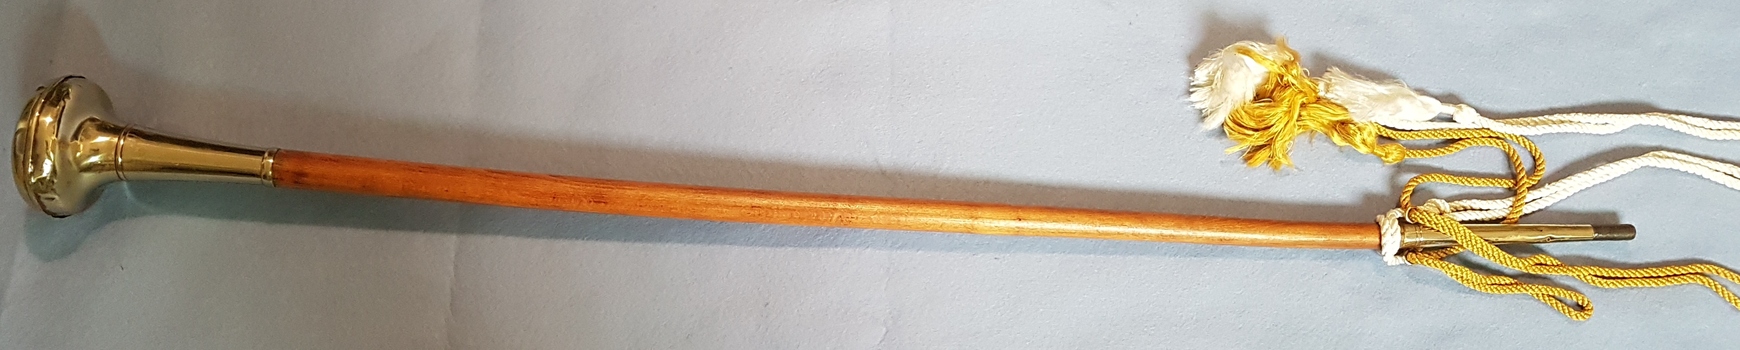 Baton used by Linton Brass Band leader.